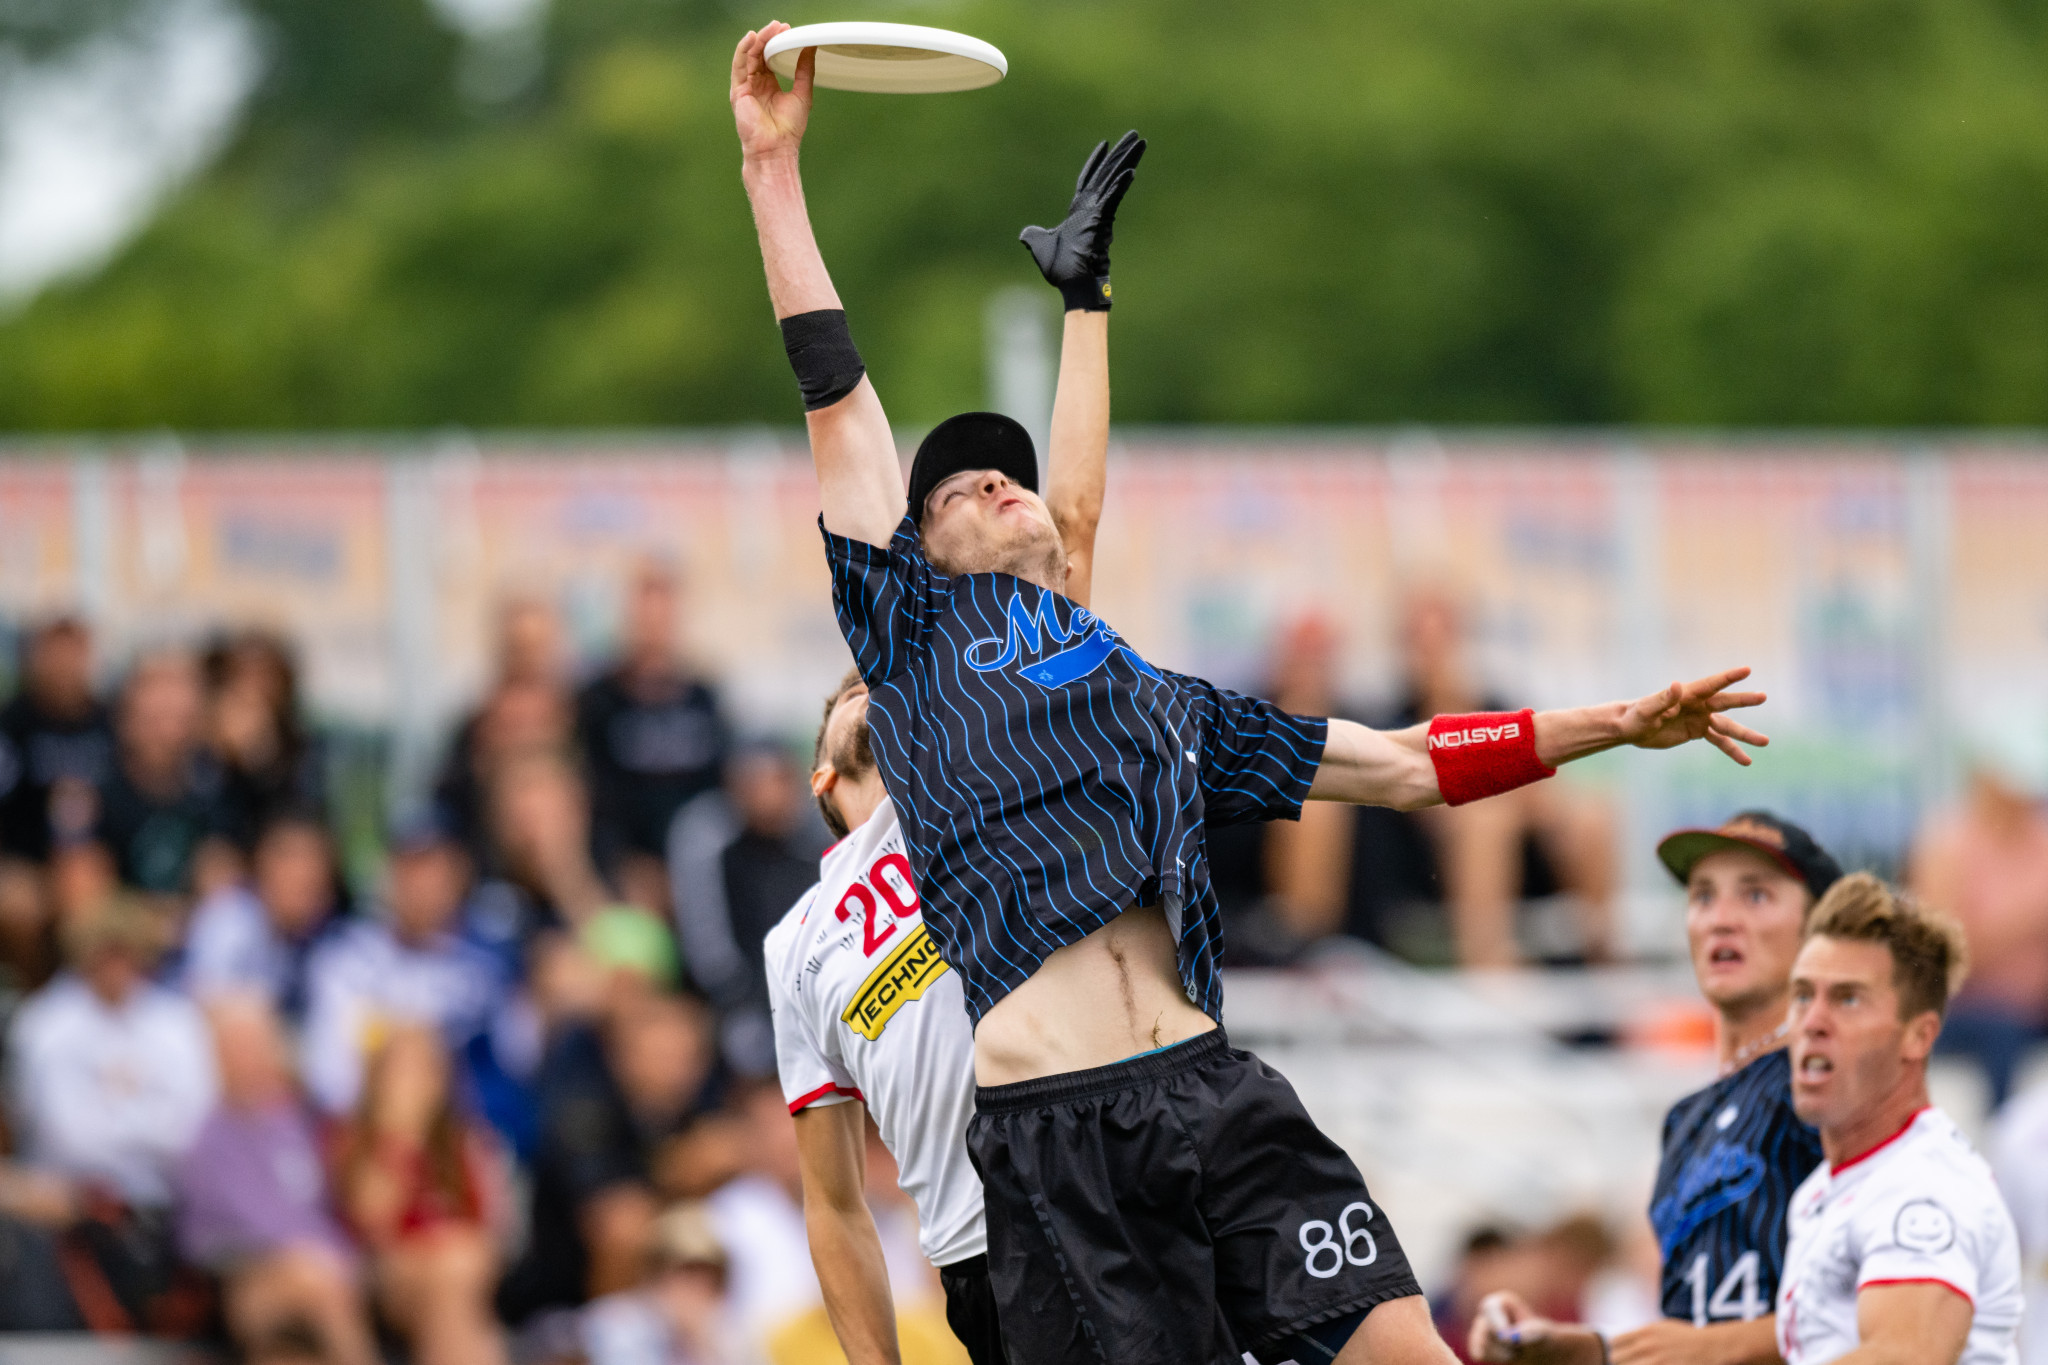 Jakob Brissette of Mephisto successfully challenged Riccardo Zanni of CUSB Open in the air ©Samuel Hotaling for UltiPhotos